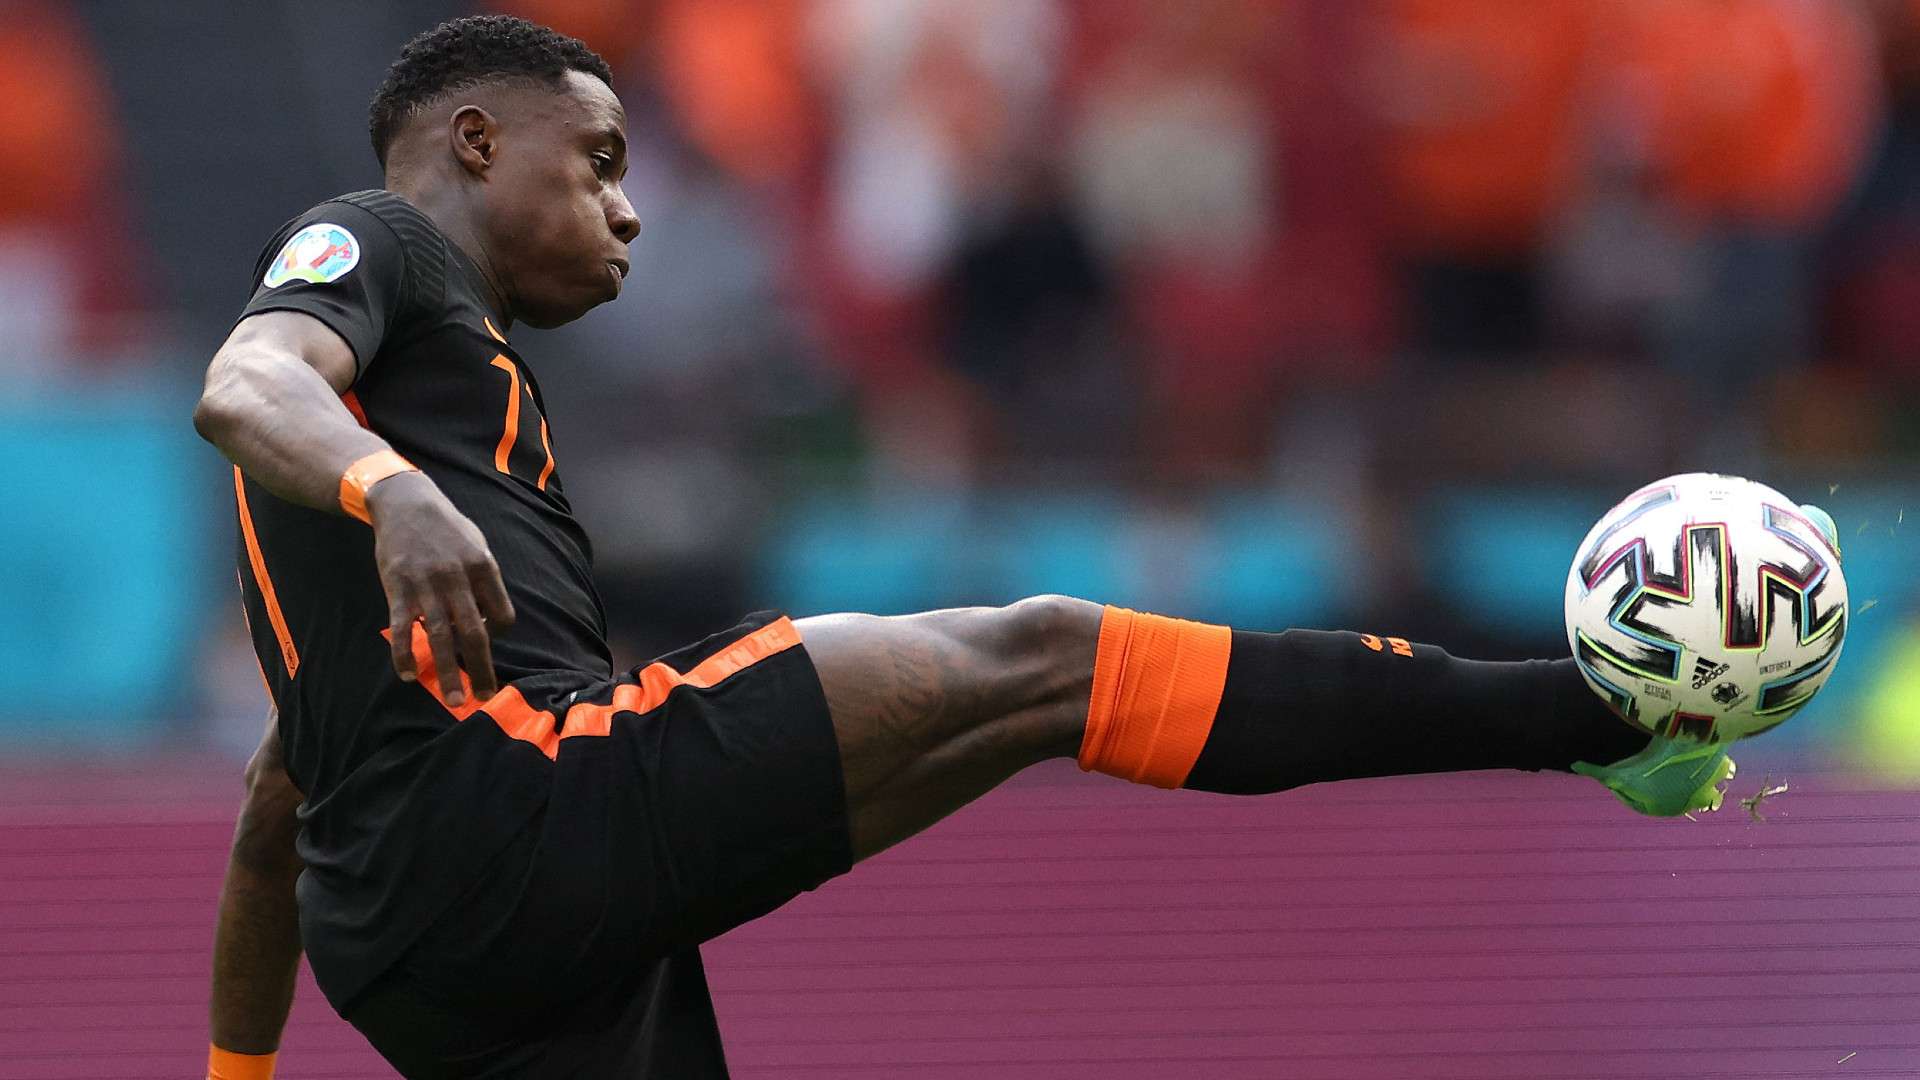 QUINCY PROMES NETHERLANDS